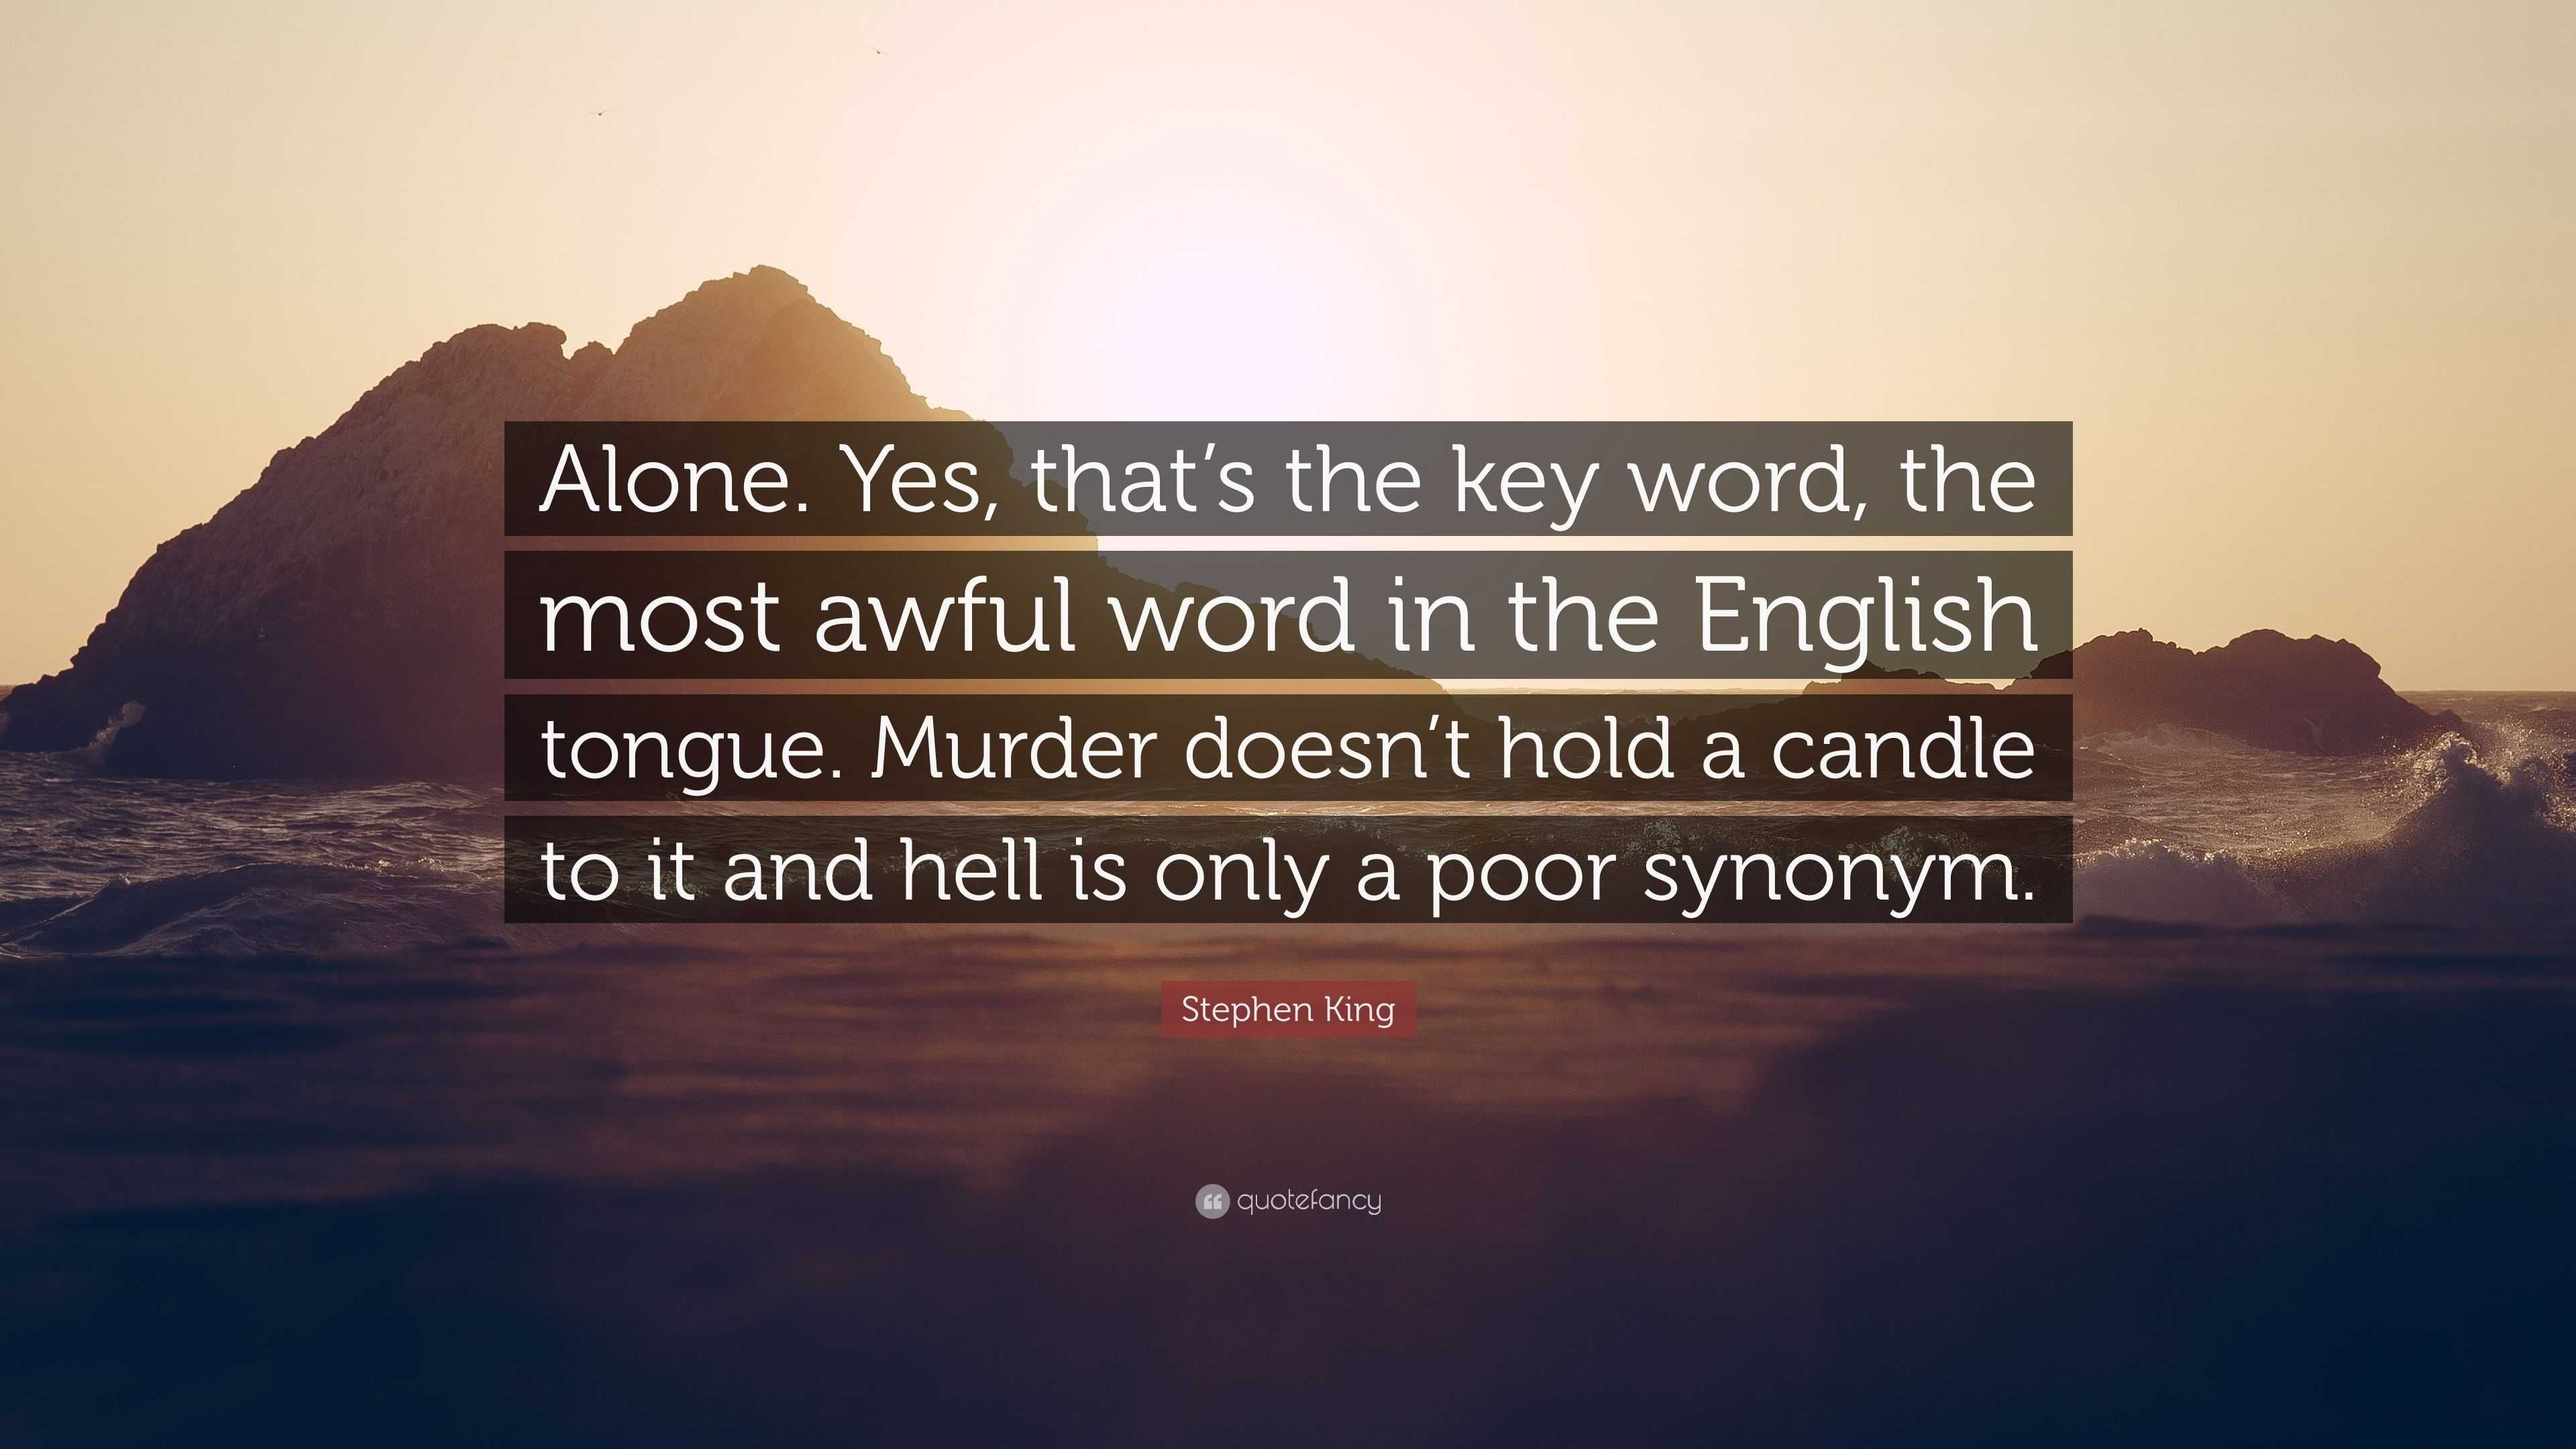 alone hell is only a poor synonym